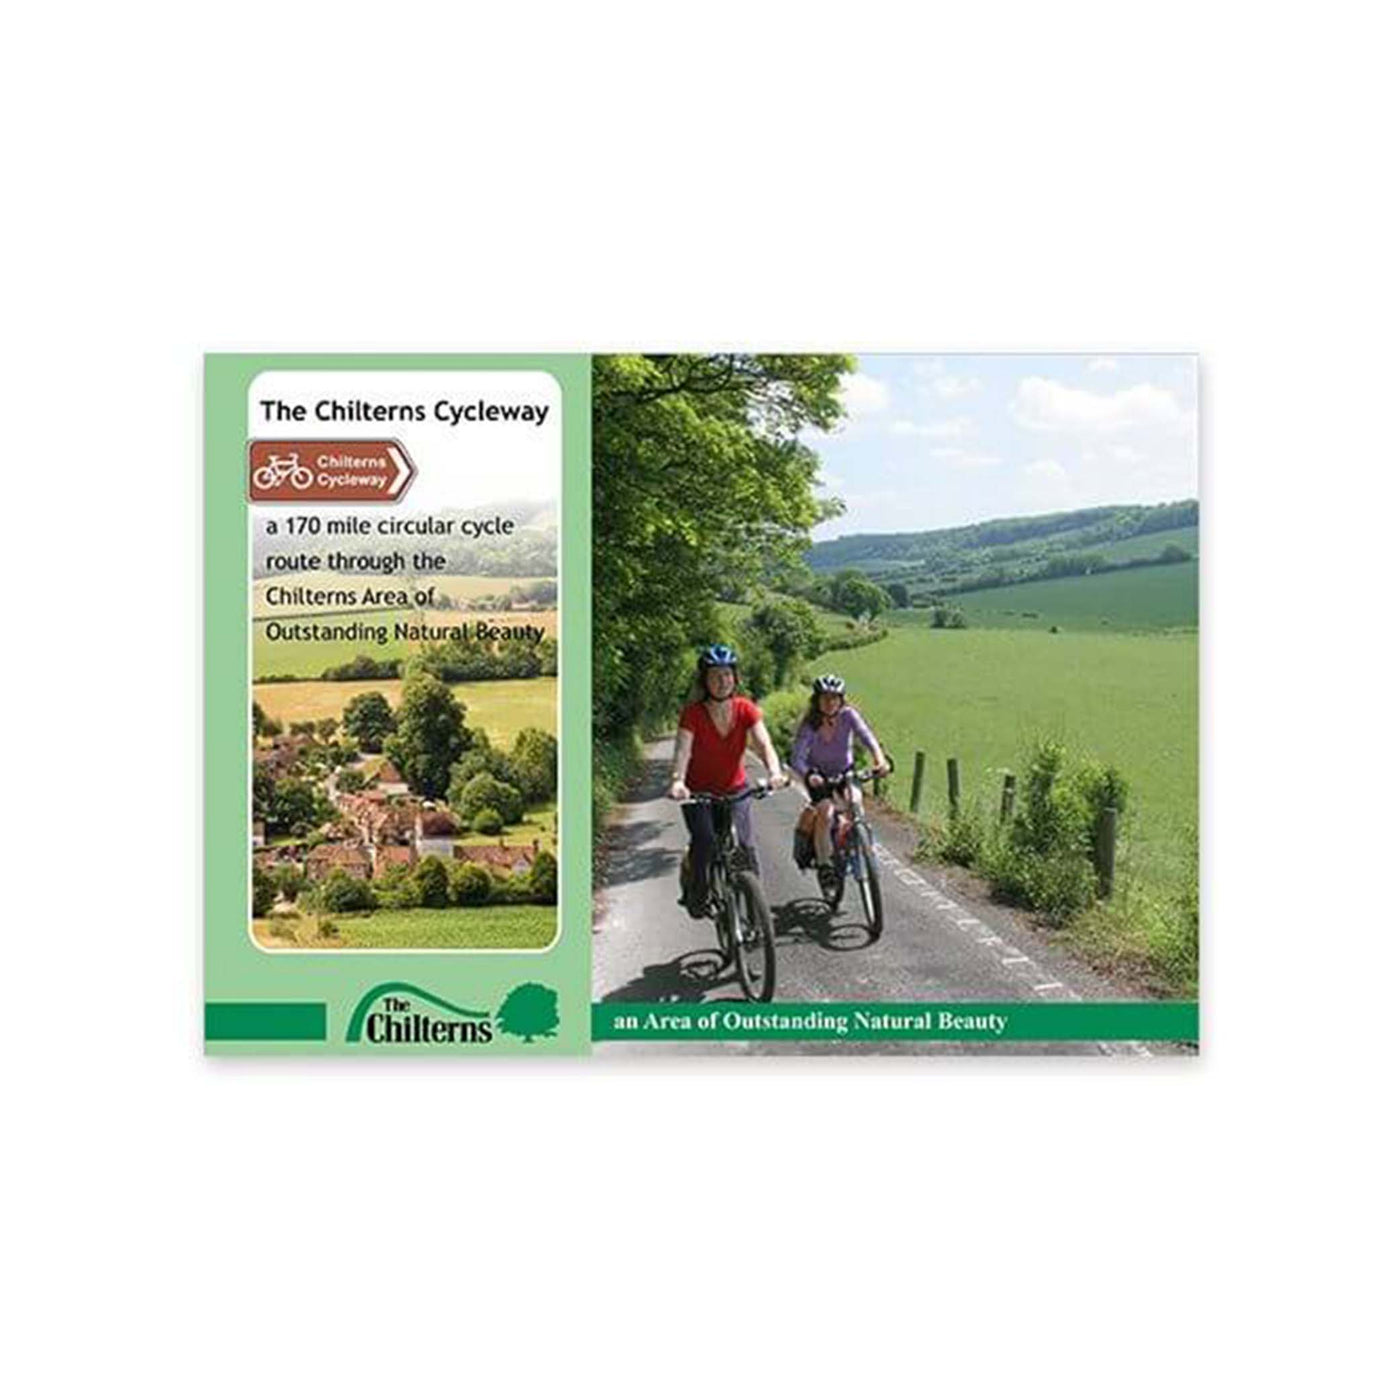 The Chilterns Cycleway guide